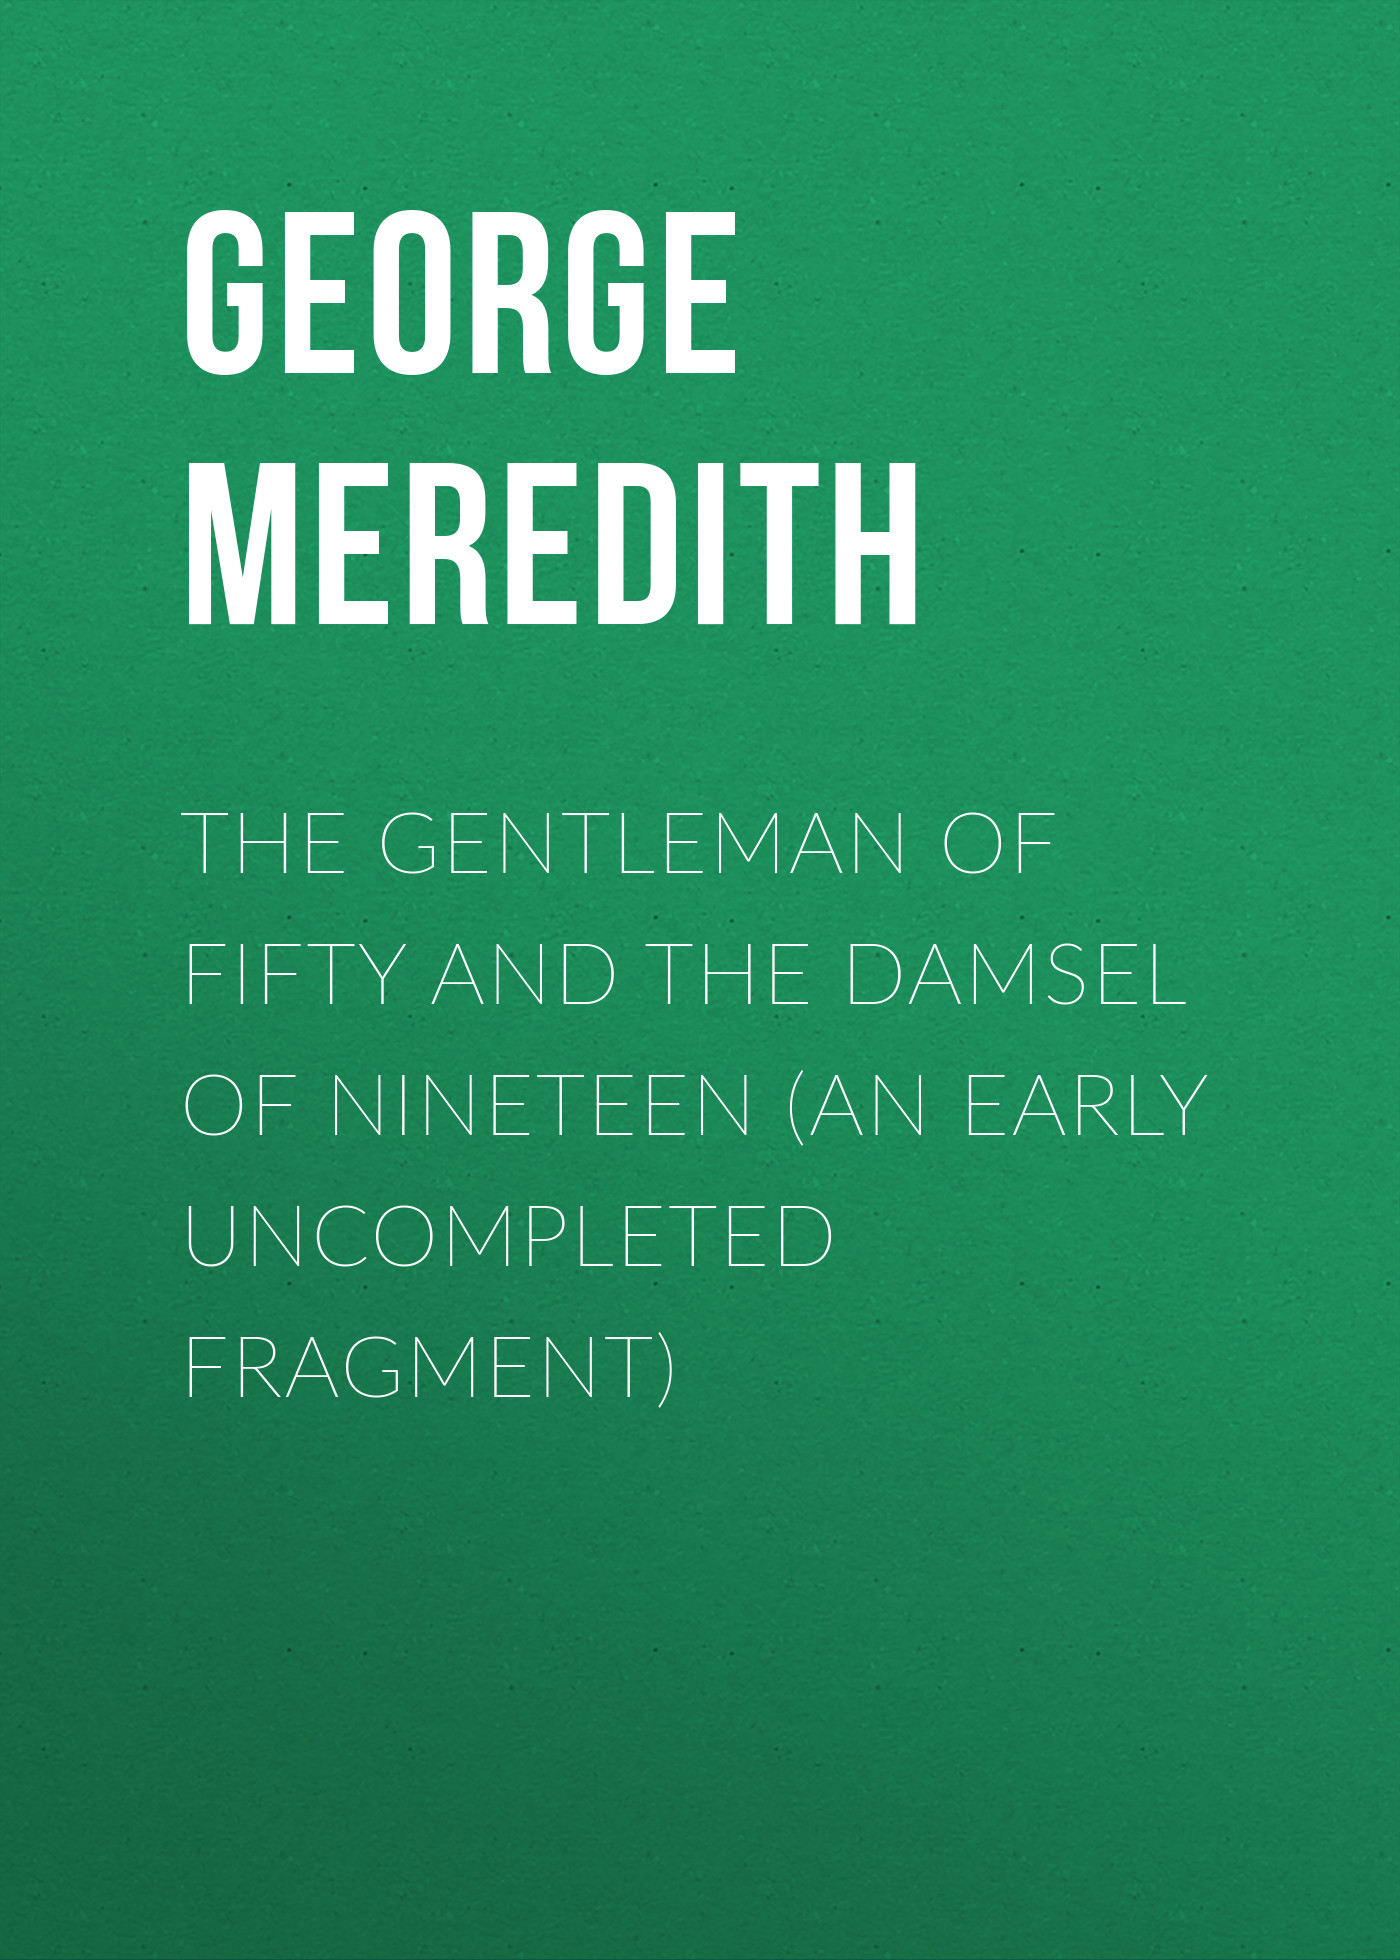 George Meredith The Gentleman of Fifty and The Damsel of Nineteen (An early uncompleted fragment)